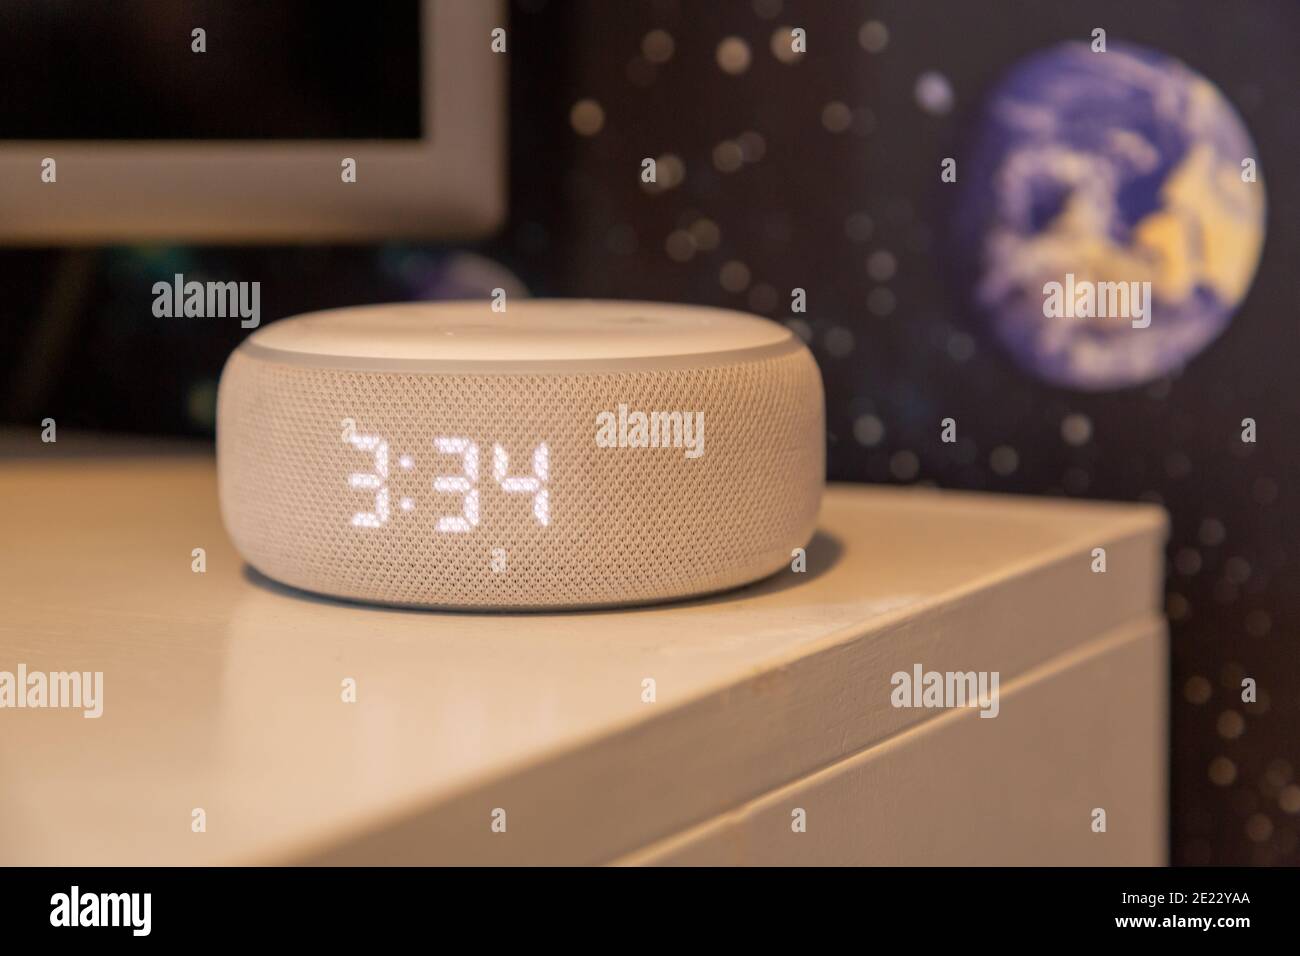 An amazon echo Dot or amazon Alexa on a table it a child's bedroom a common  smart home device Stock Photo - Alamy